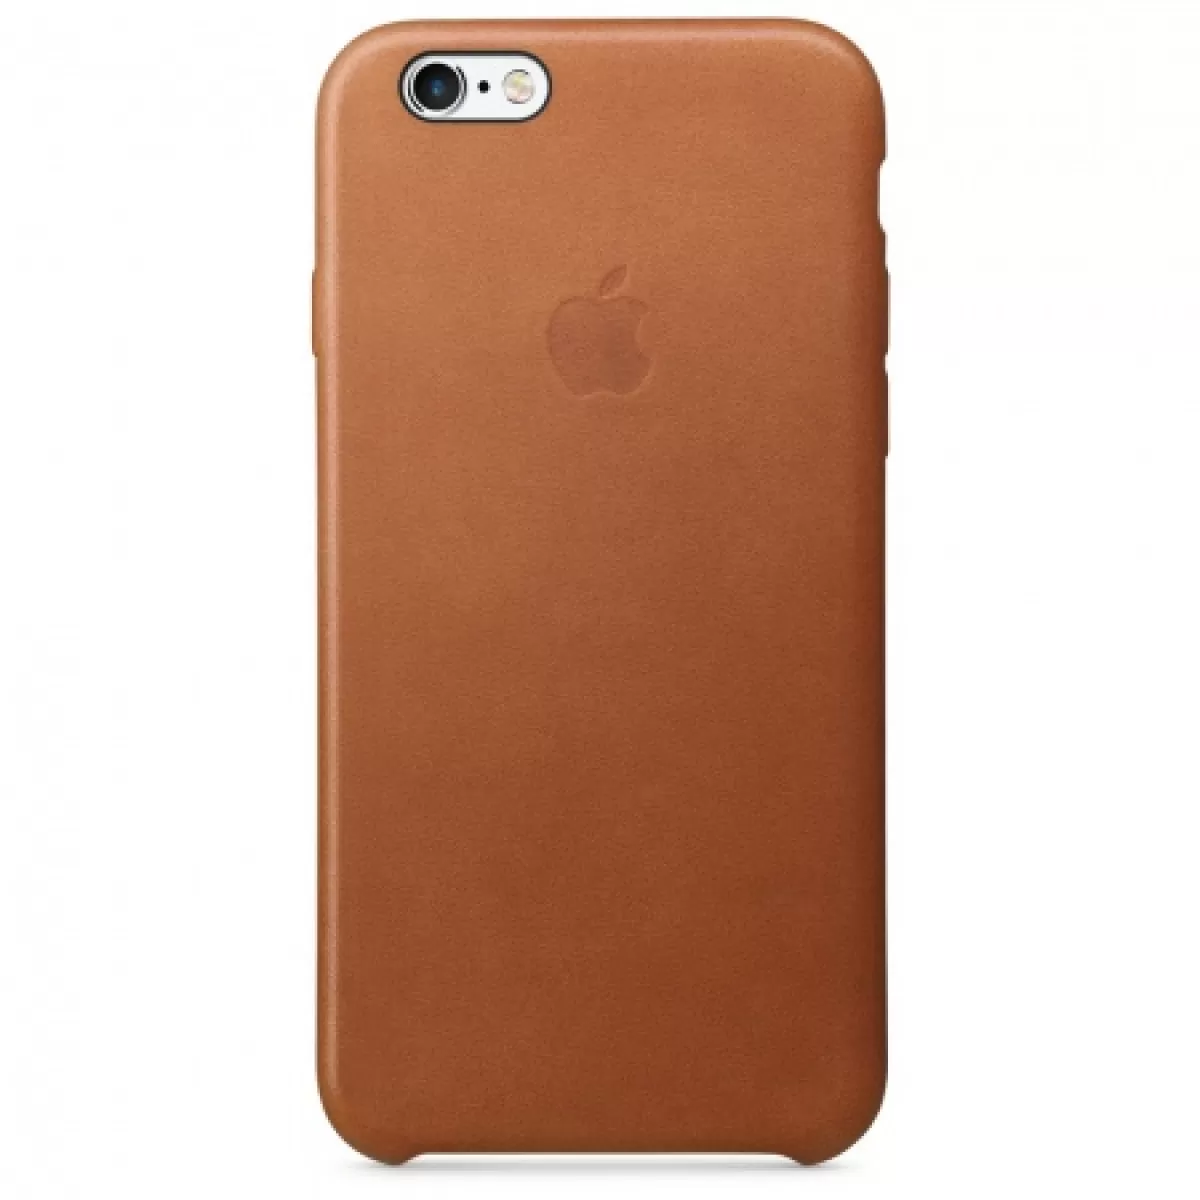 Apple iPhone 6s Plus Leather Case Saddle Brown